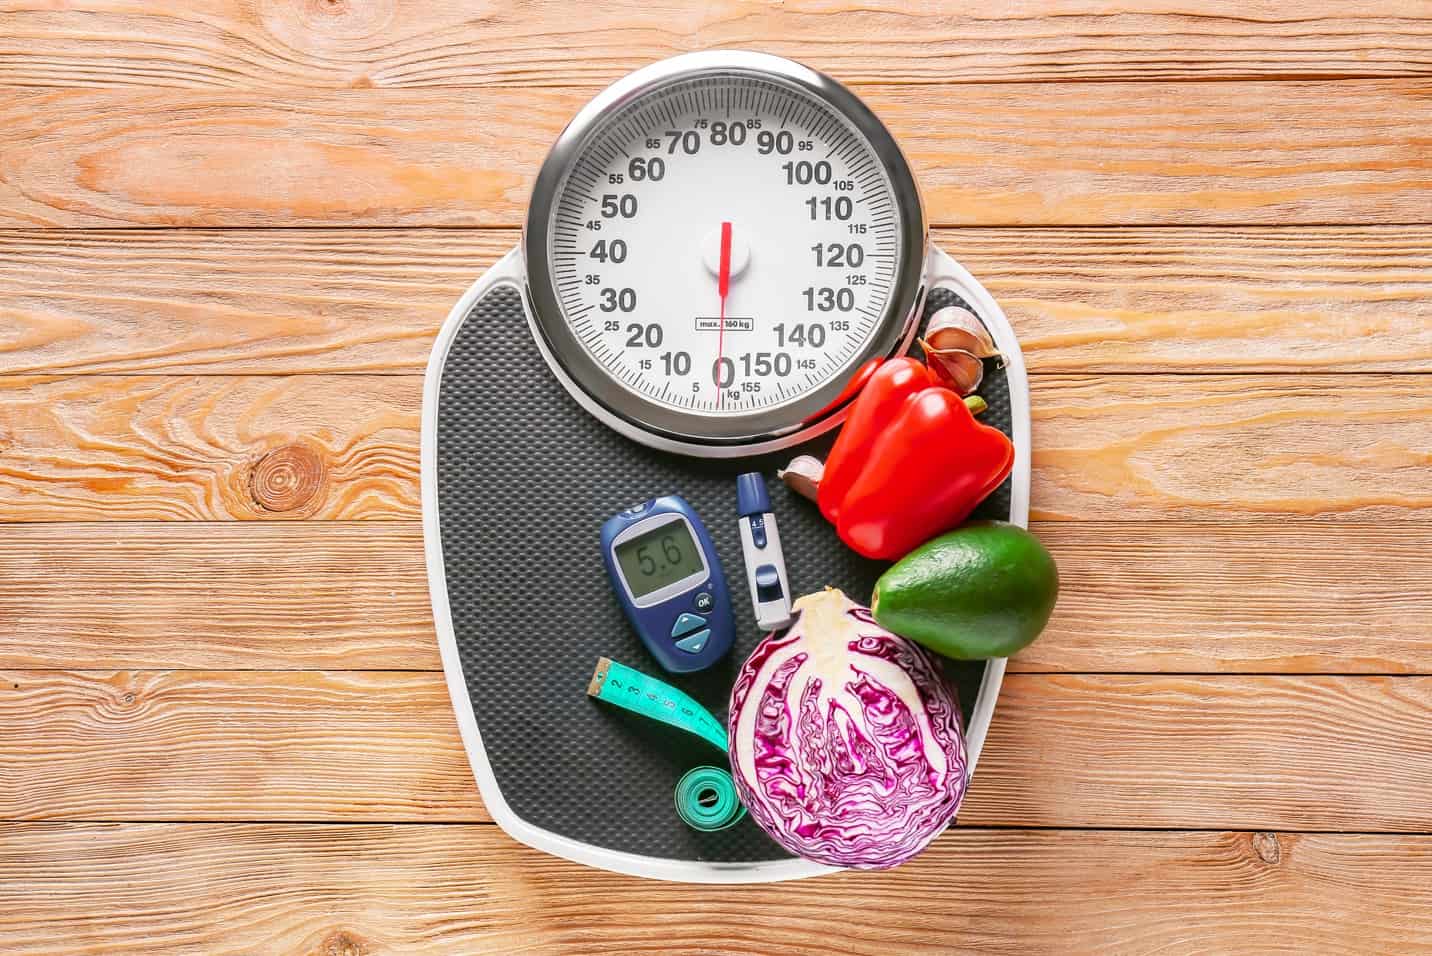 Weight loss and diabetes management